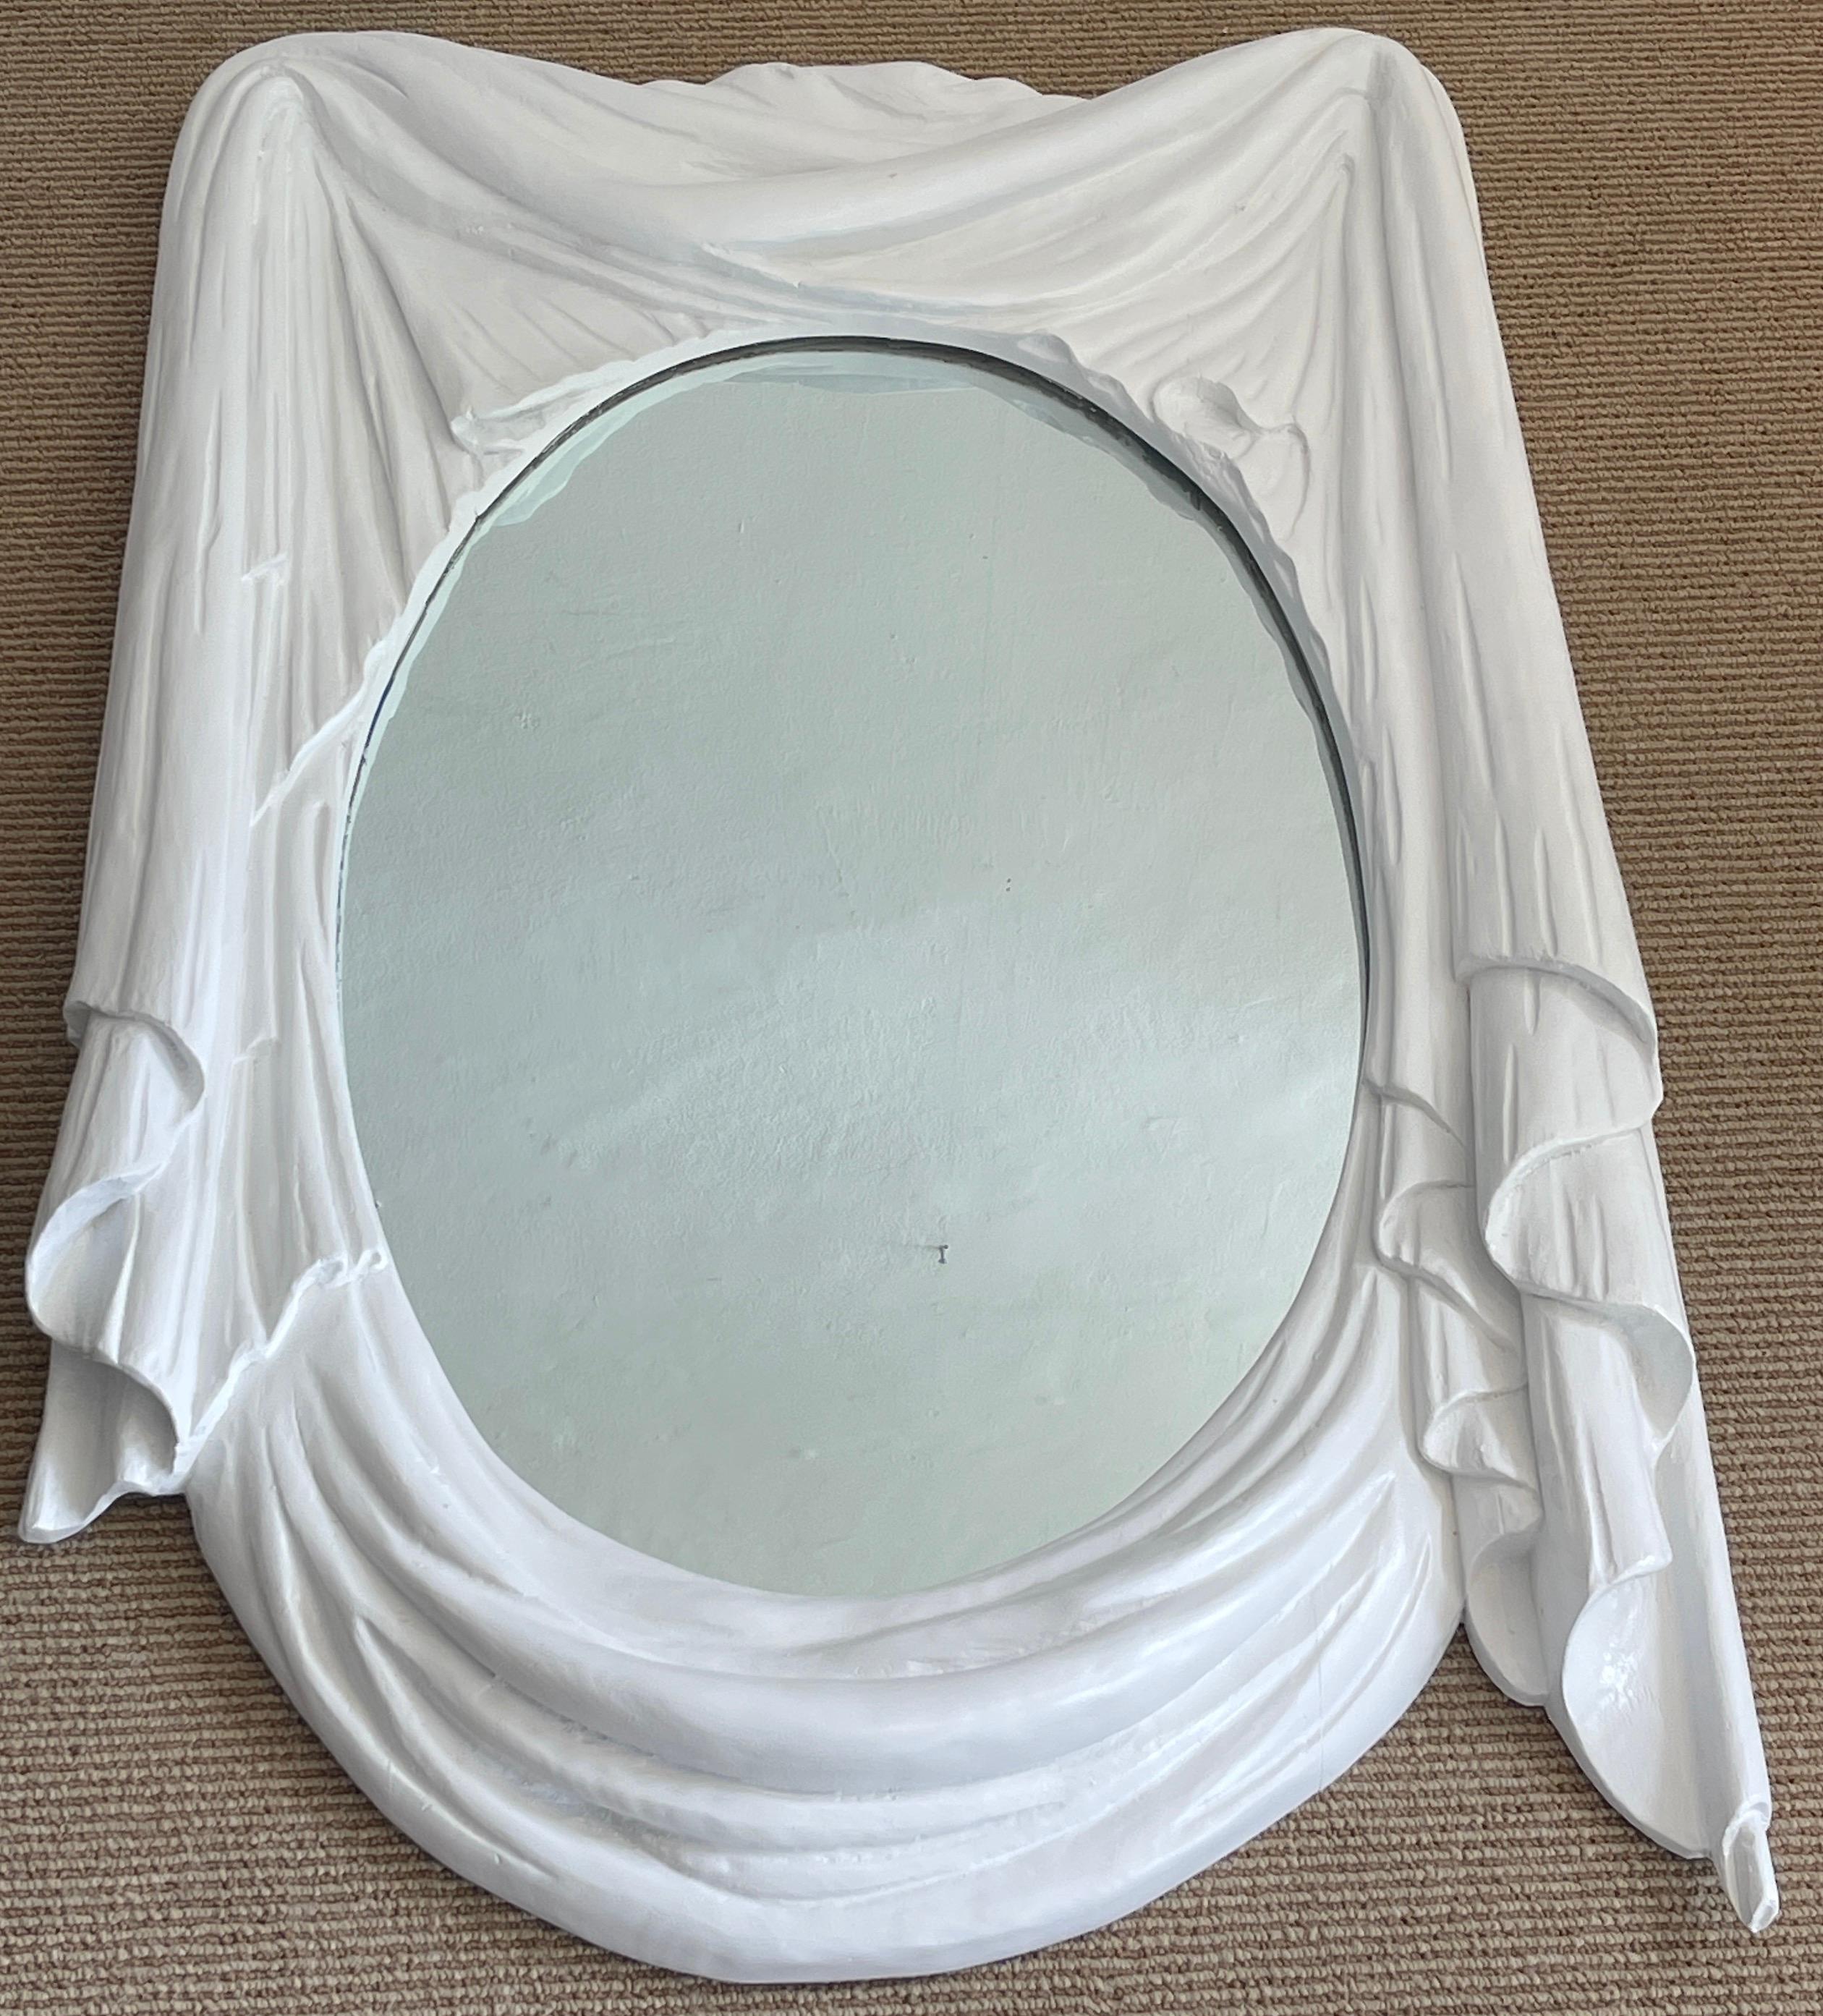 Modern white lacquered carved wood draped mirror, beautifully executed, realistically carved and lacquered in white. The inset mirror measures 19